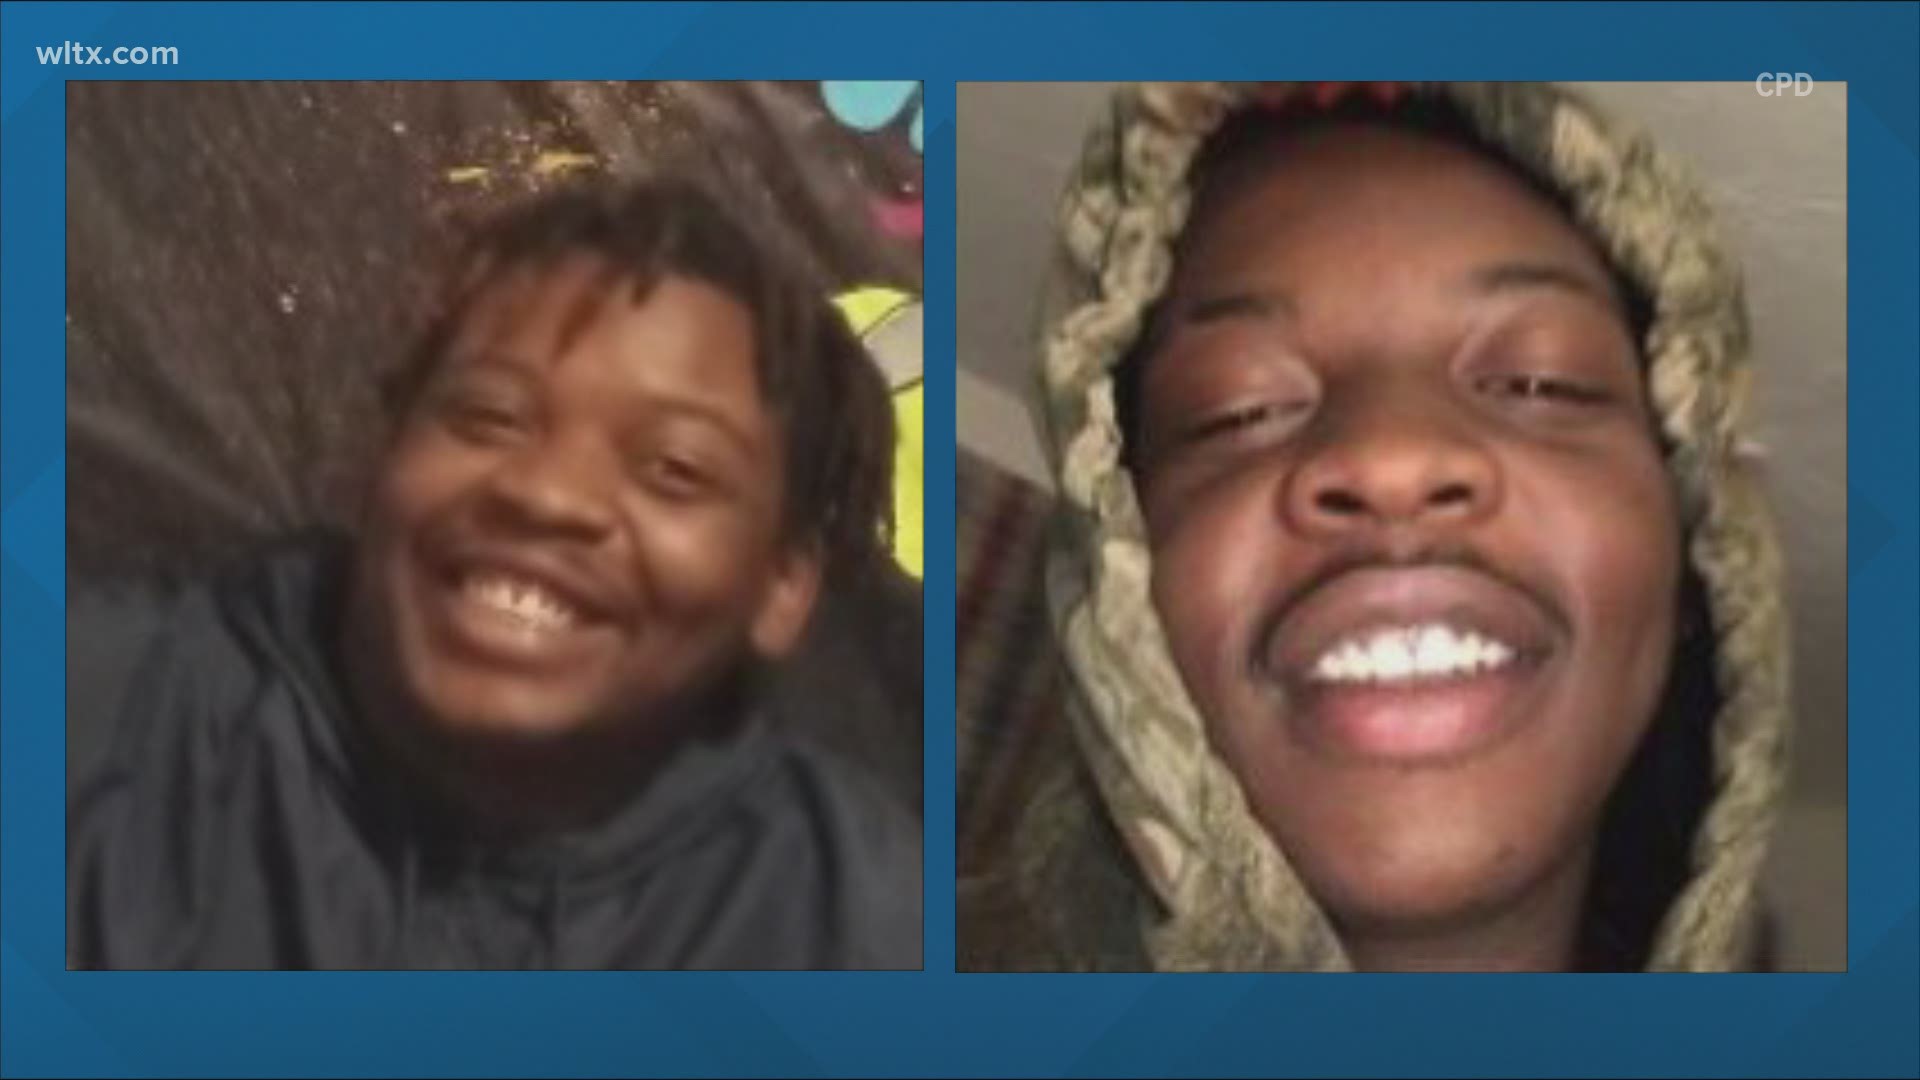 Loved ones became concerned when Kendryll Lamont Jones, 21, did not show up to work, according to CPD.